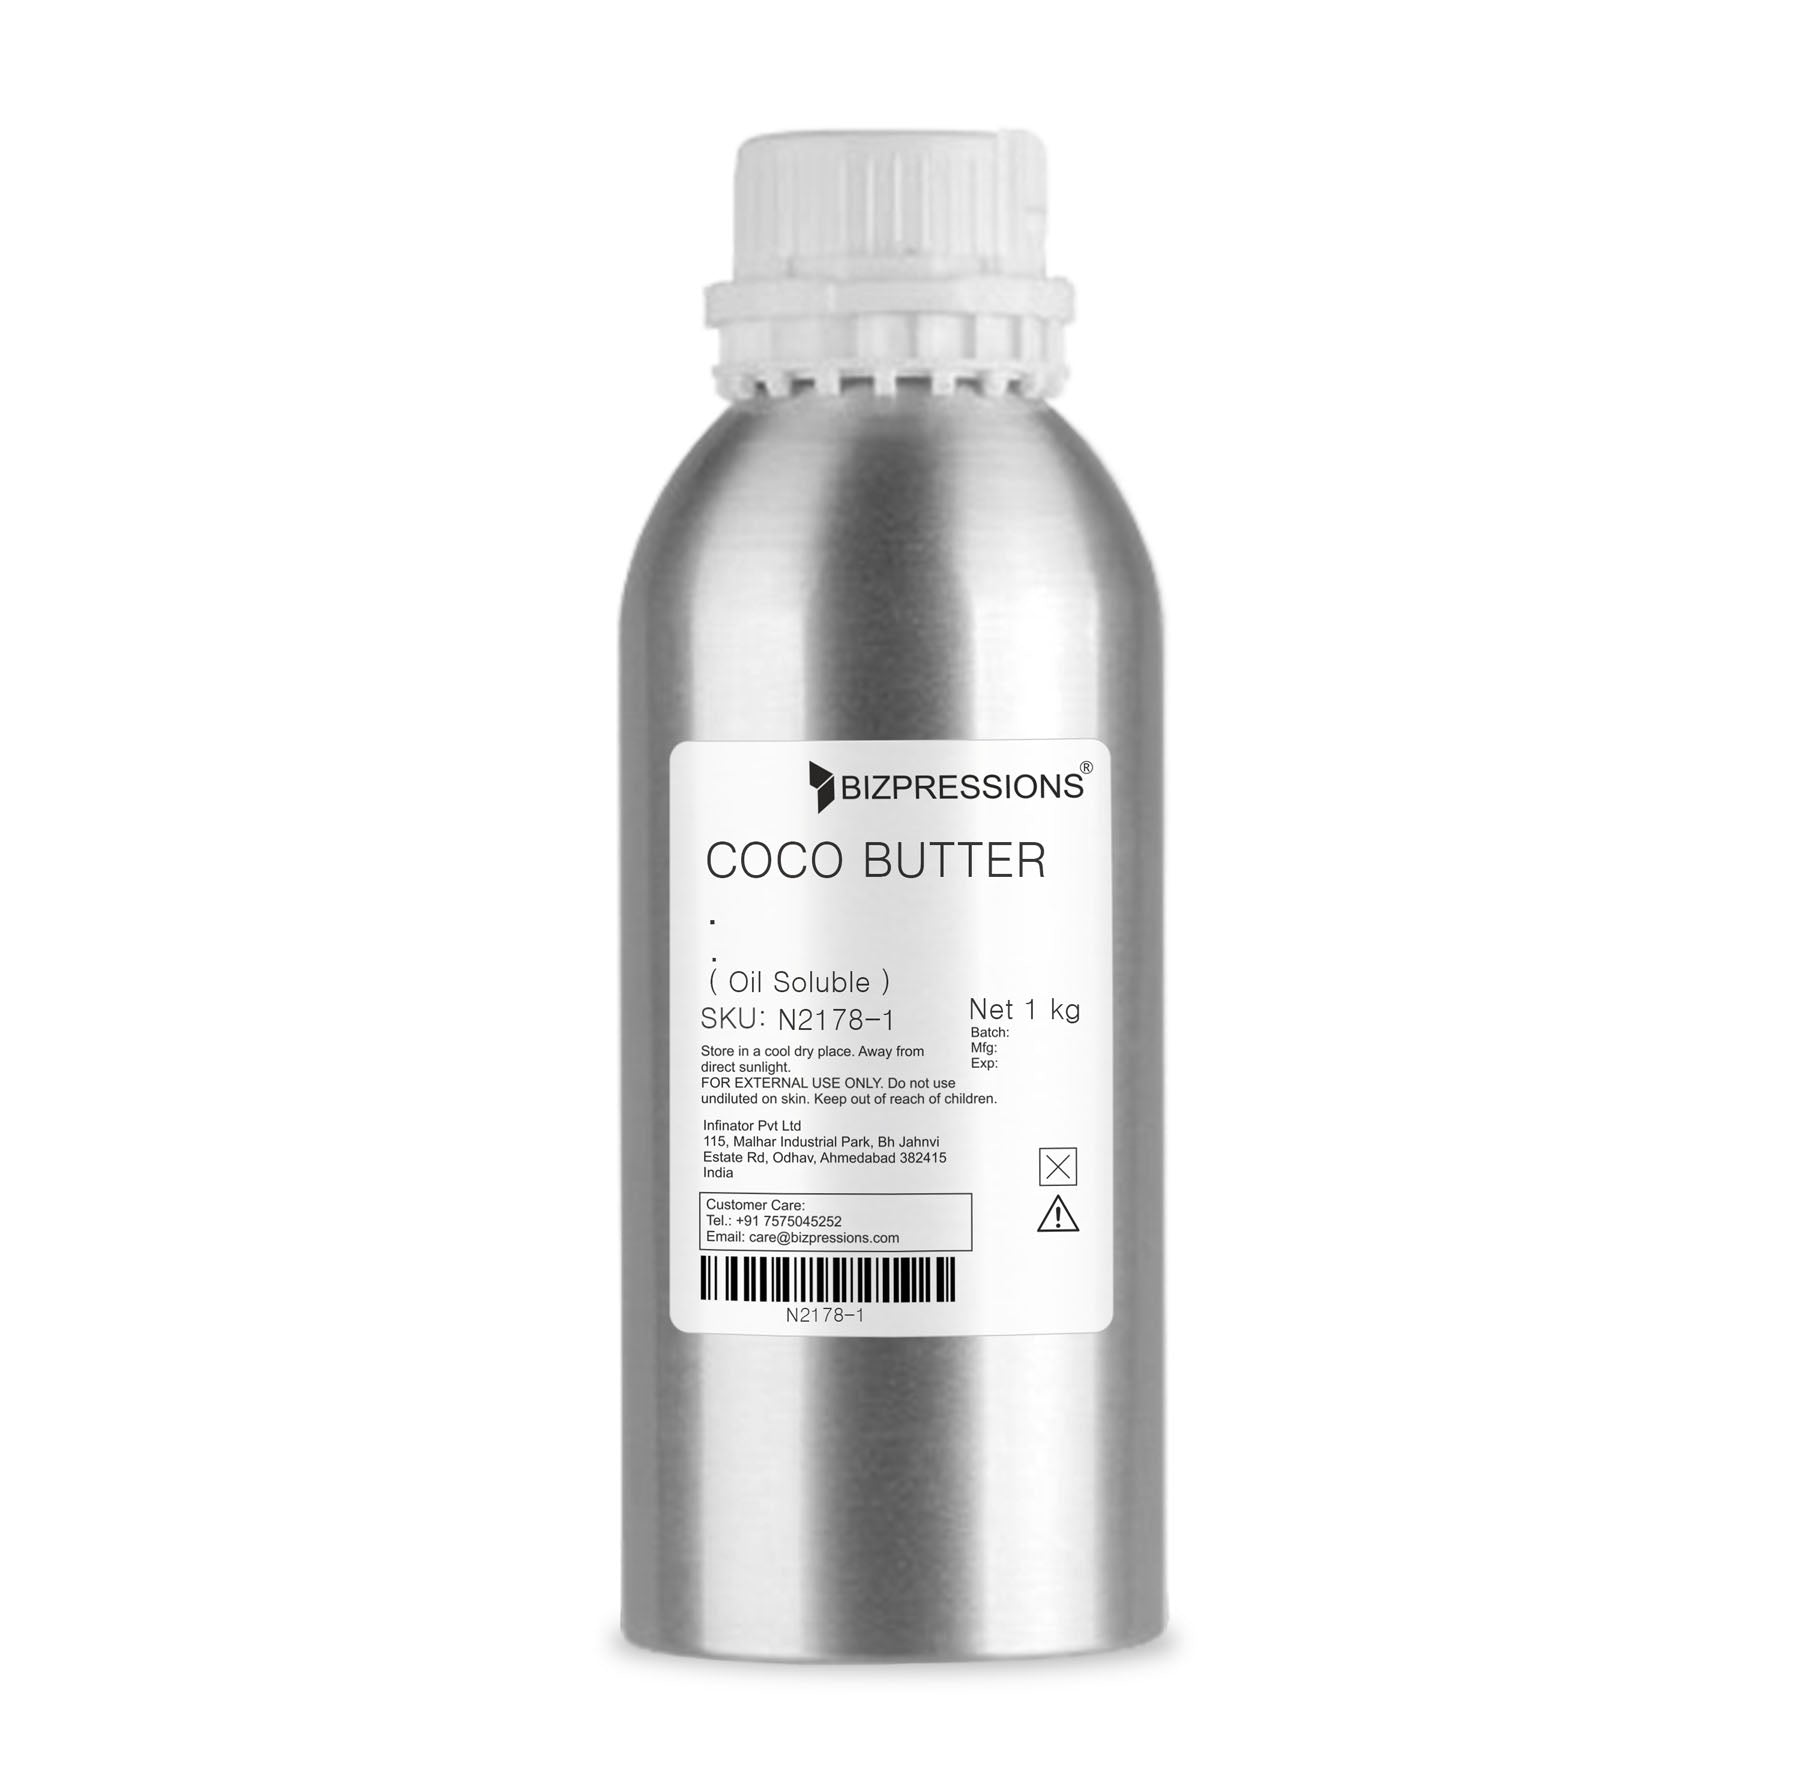 COCO BUTTER - Fragrance ( Oil Soluble ) - 1 kg